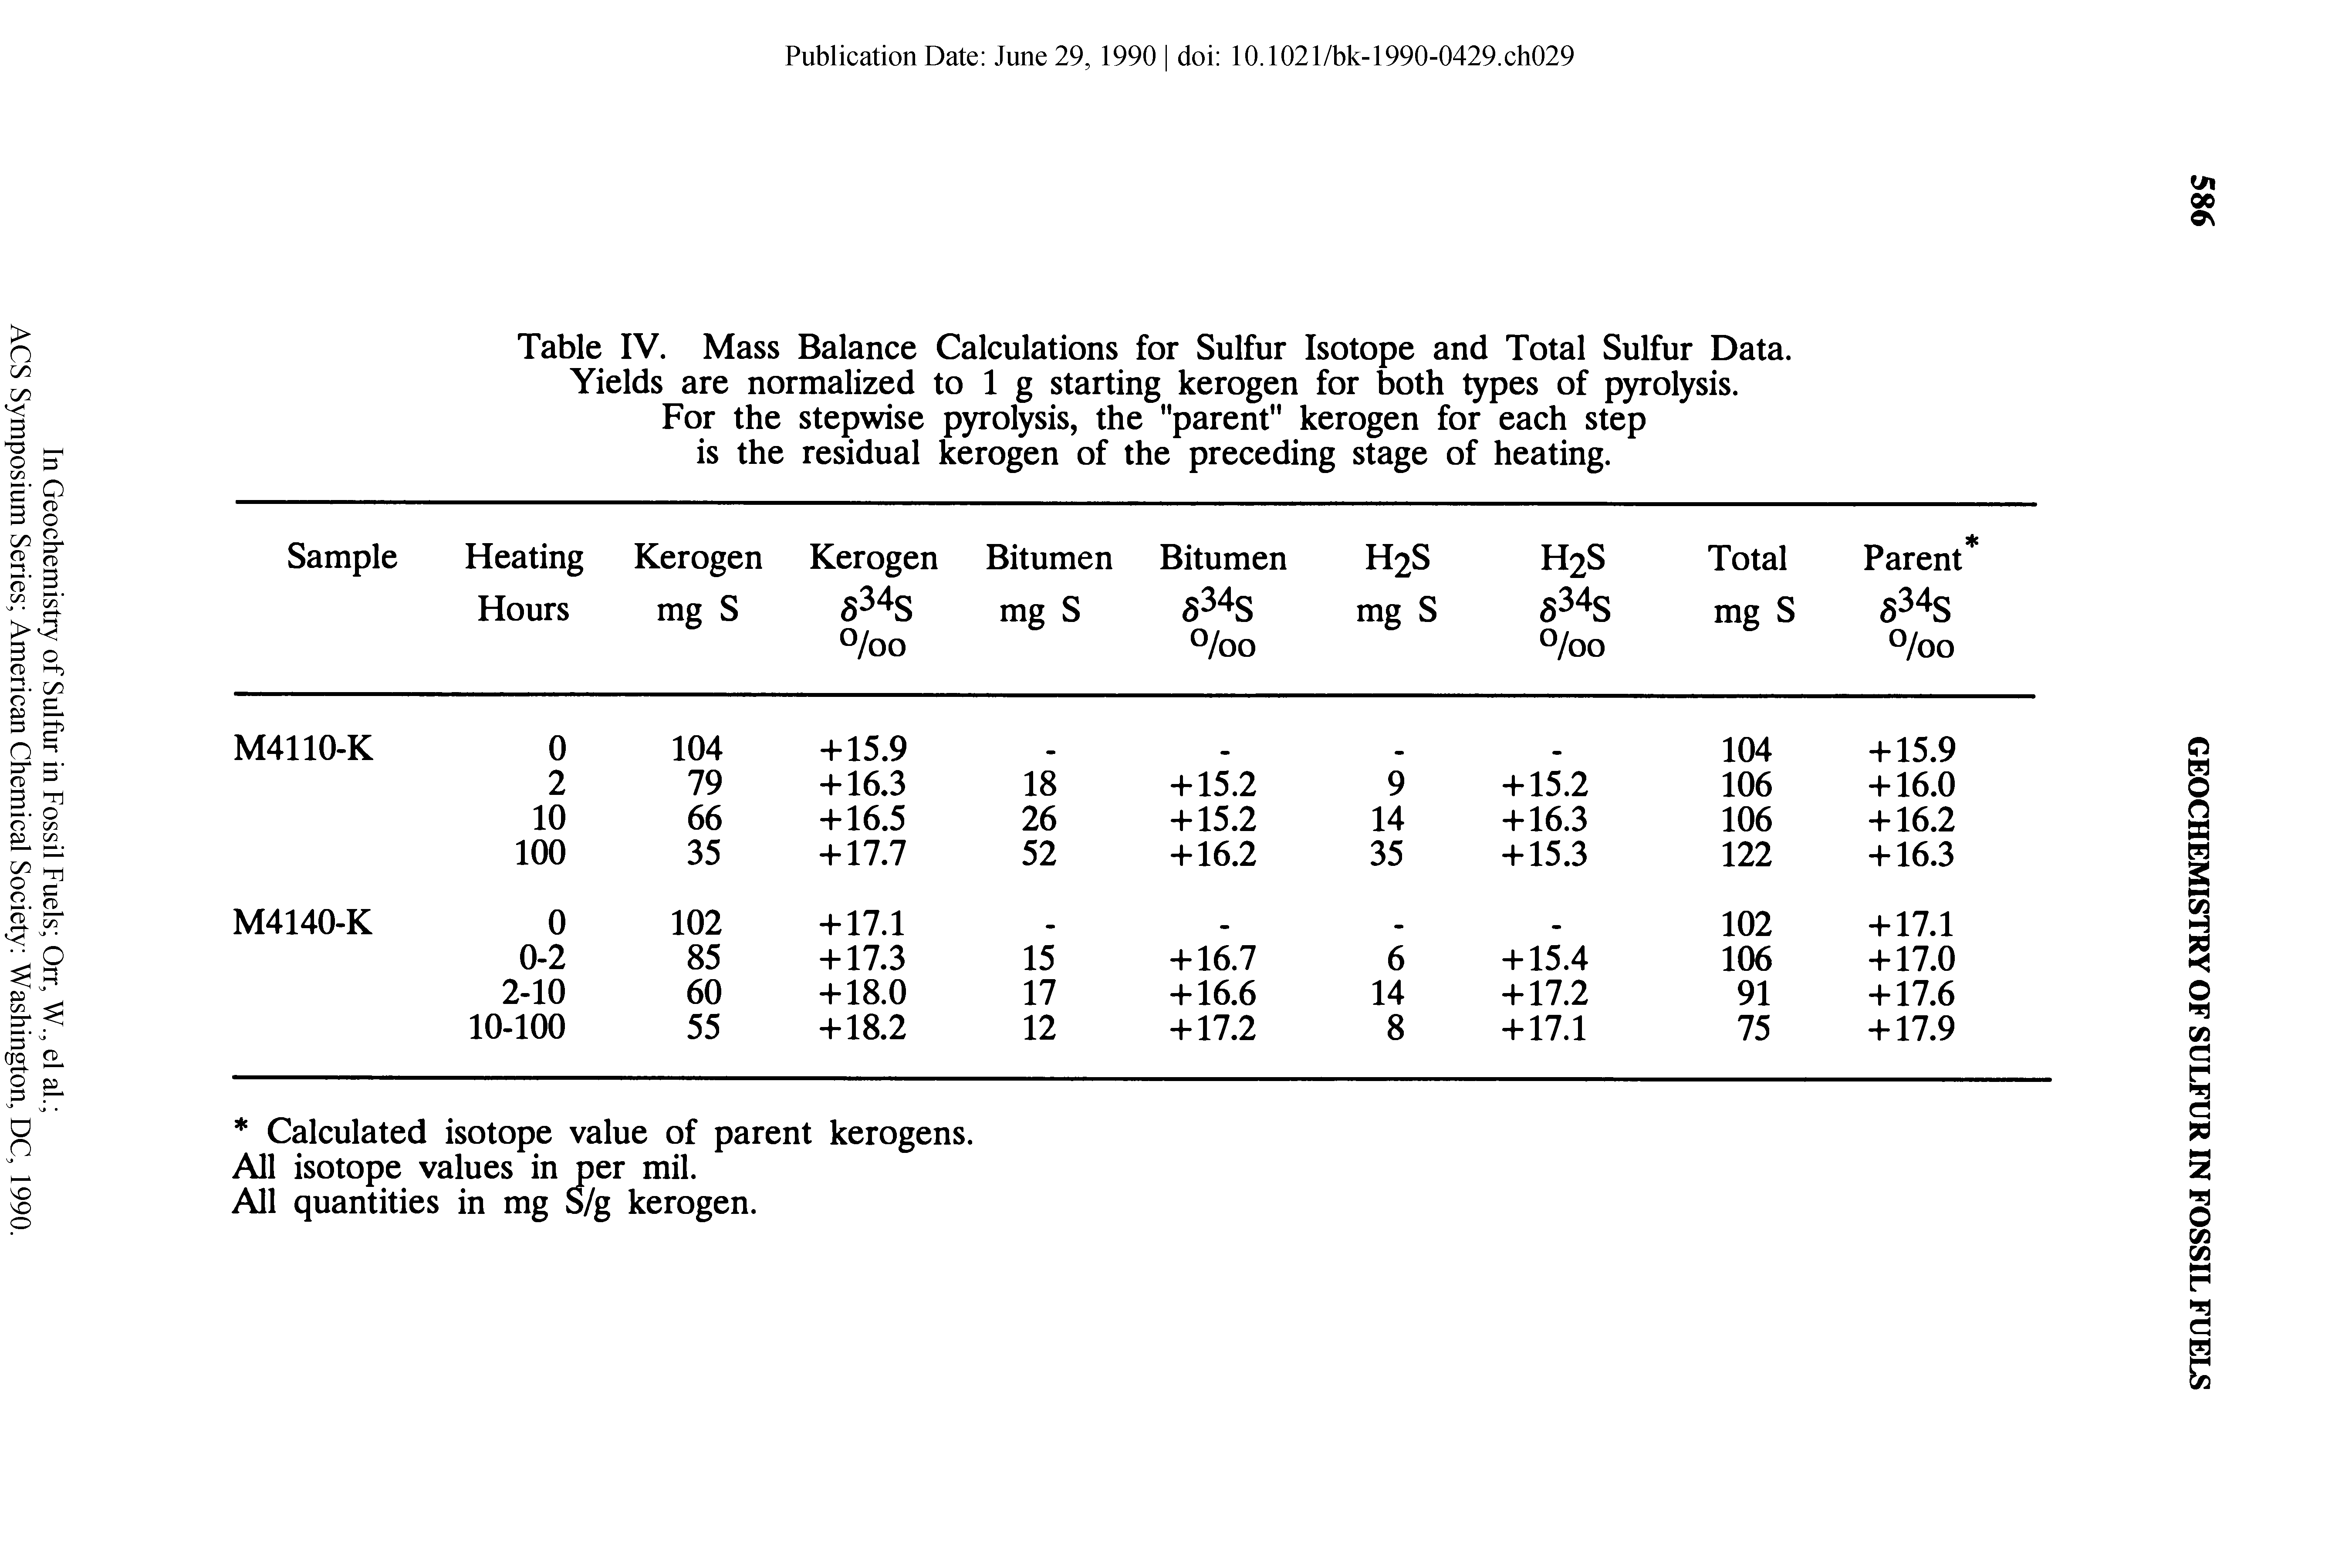 Table IV. Mass Balance Calculations for Sulfur Isotope and Total Sulfur Data. Yields are normalized to 1 g starting kerogen for both types of pyrolysis.